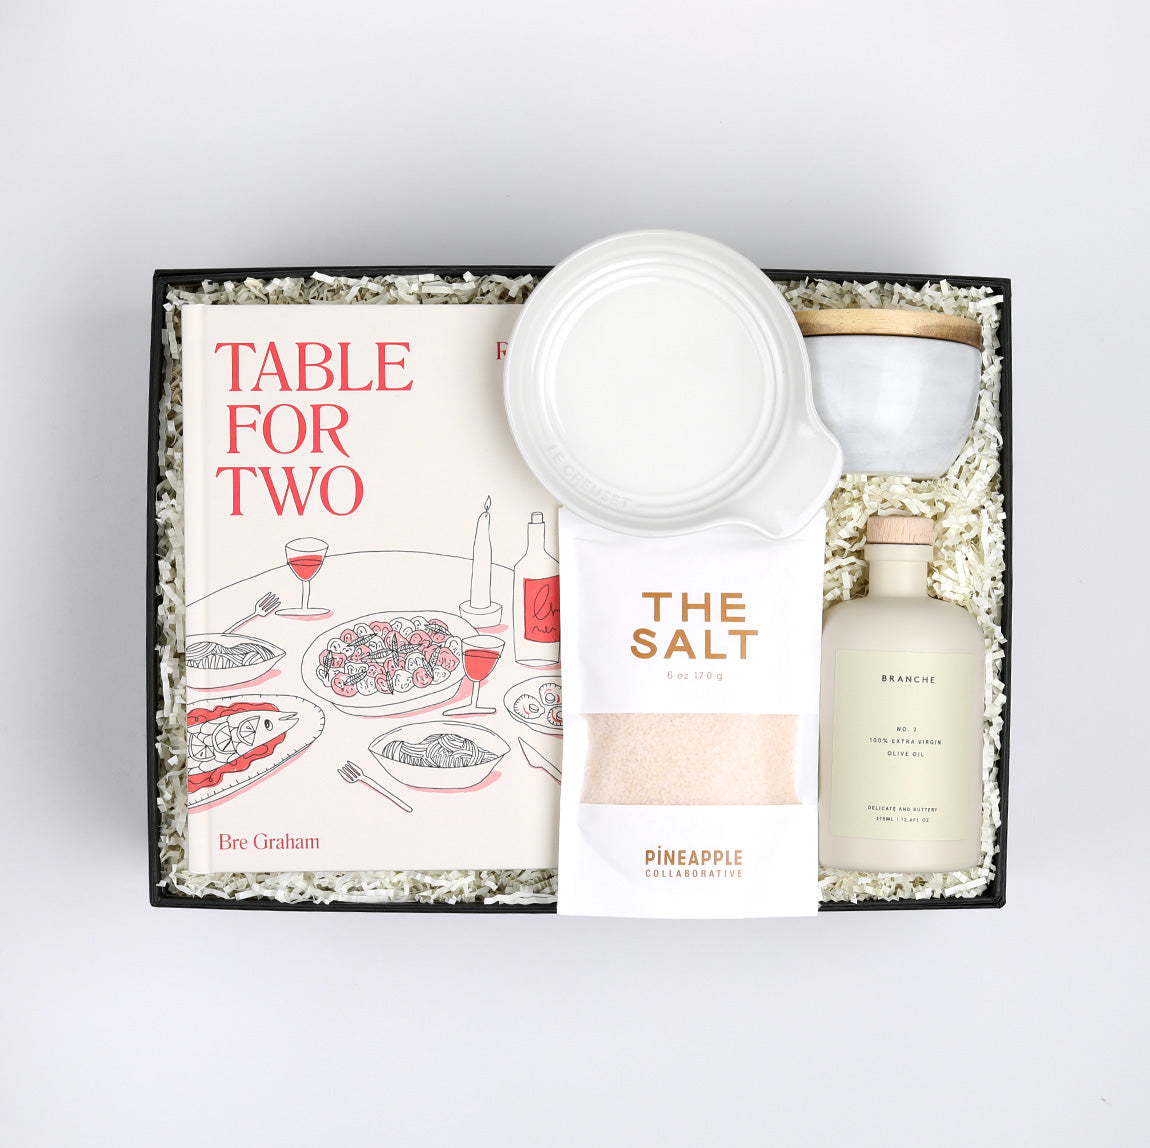 Table for Two ready to ship in black featuring "Table for Two" cookbook, Le Creuset spoon rest, Branche olive oil, The Salt, and marble salt cellar